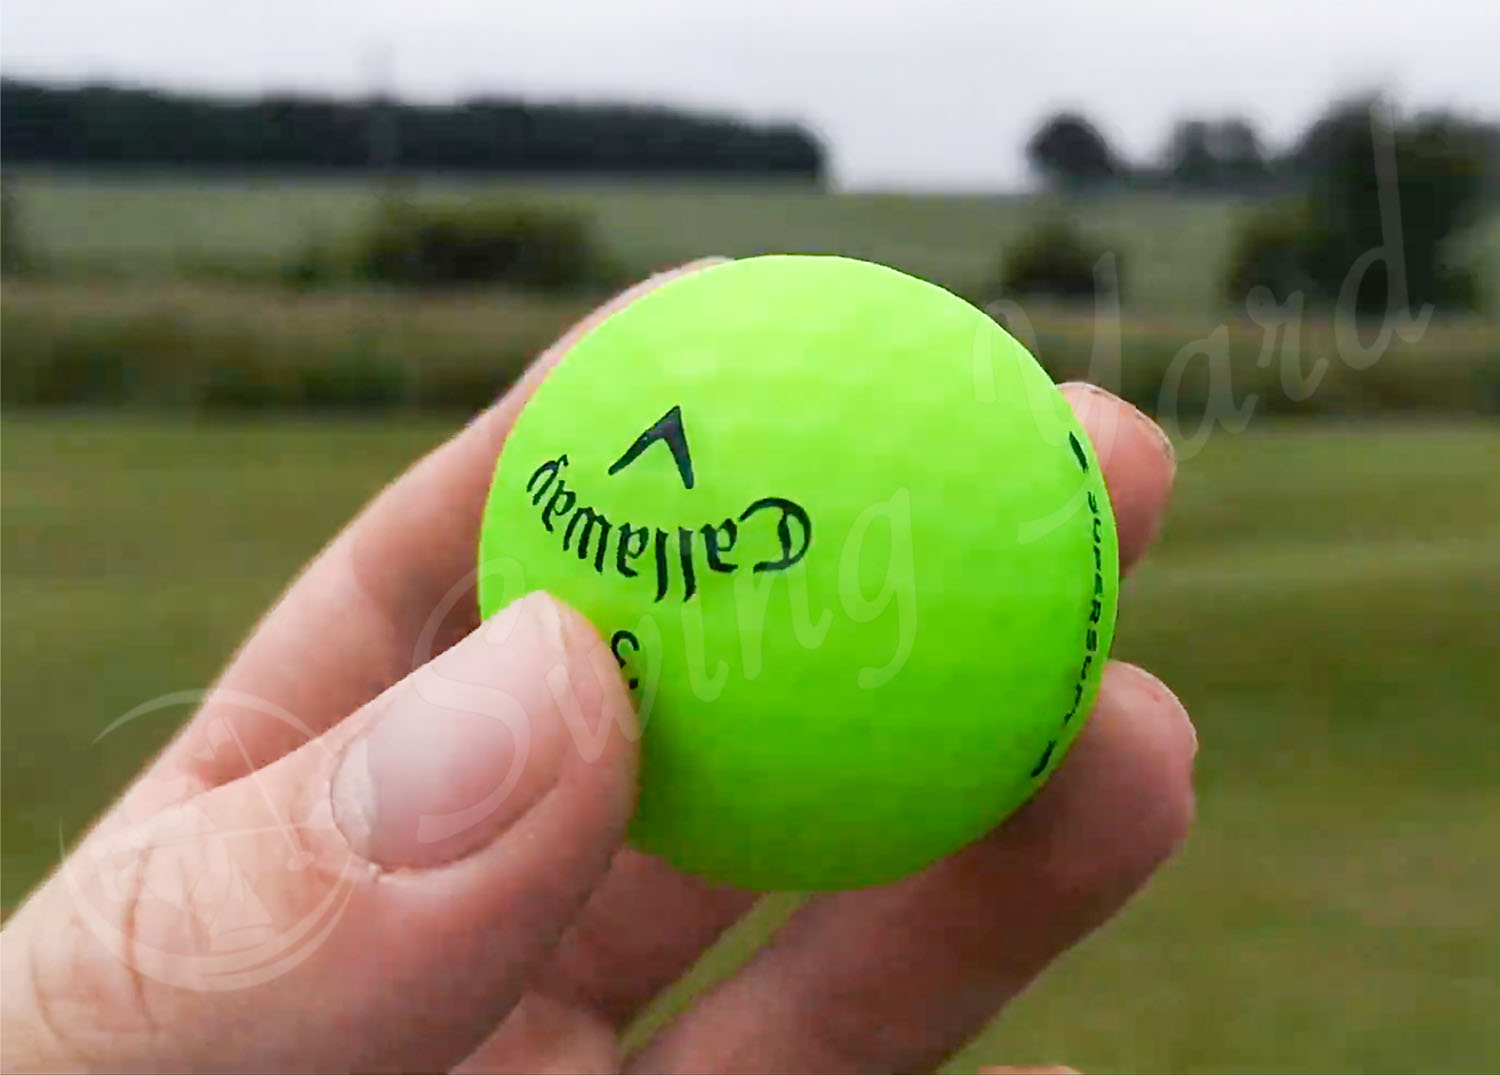 One of the best balls for high handicappers